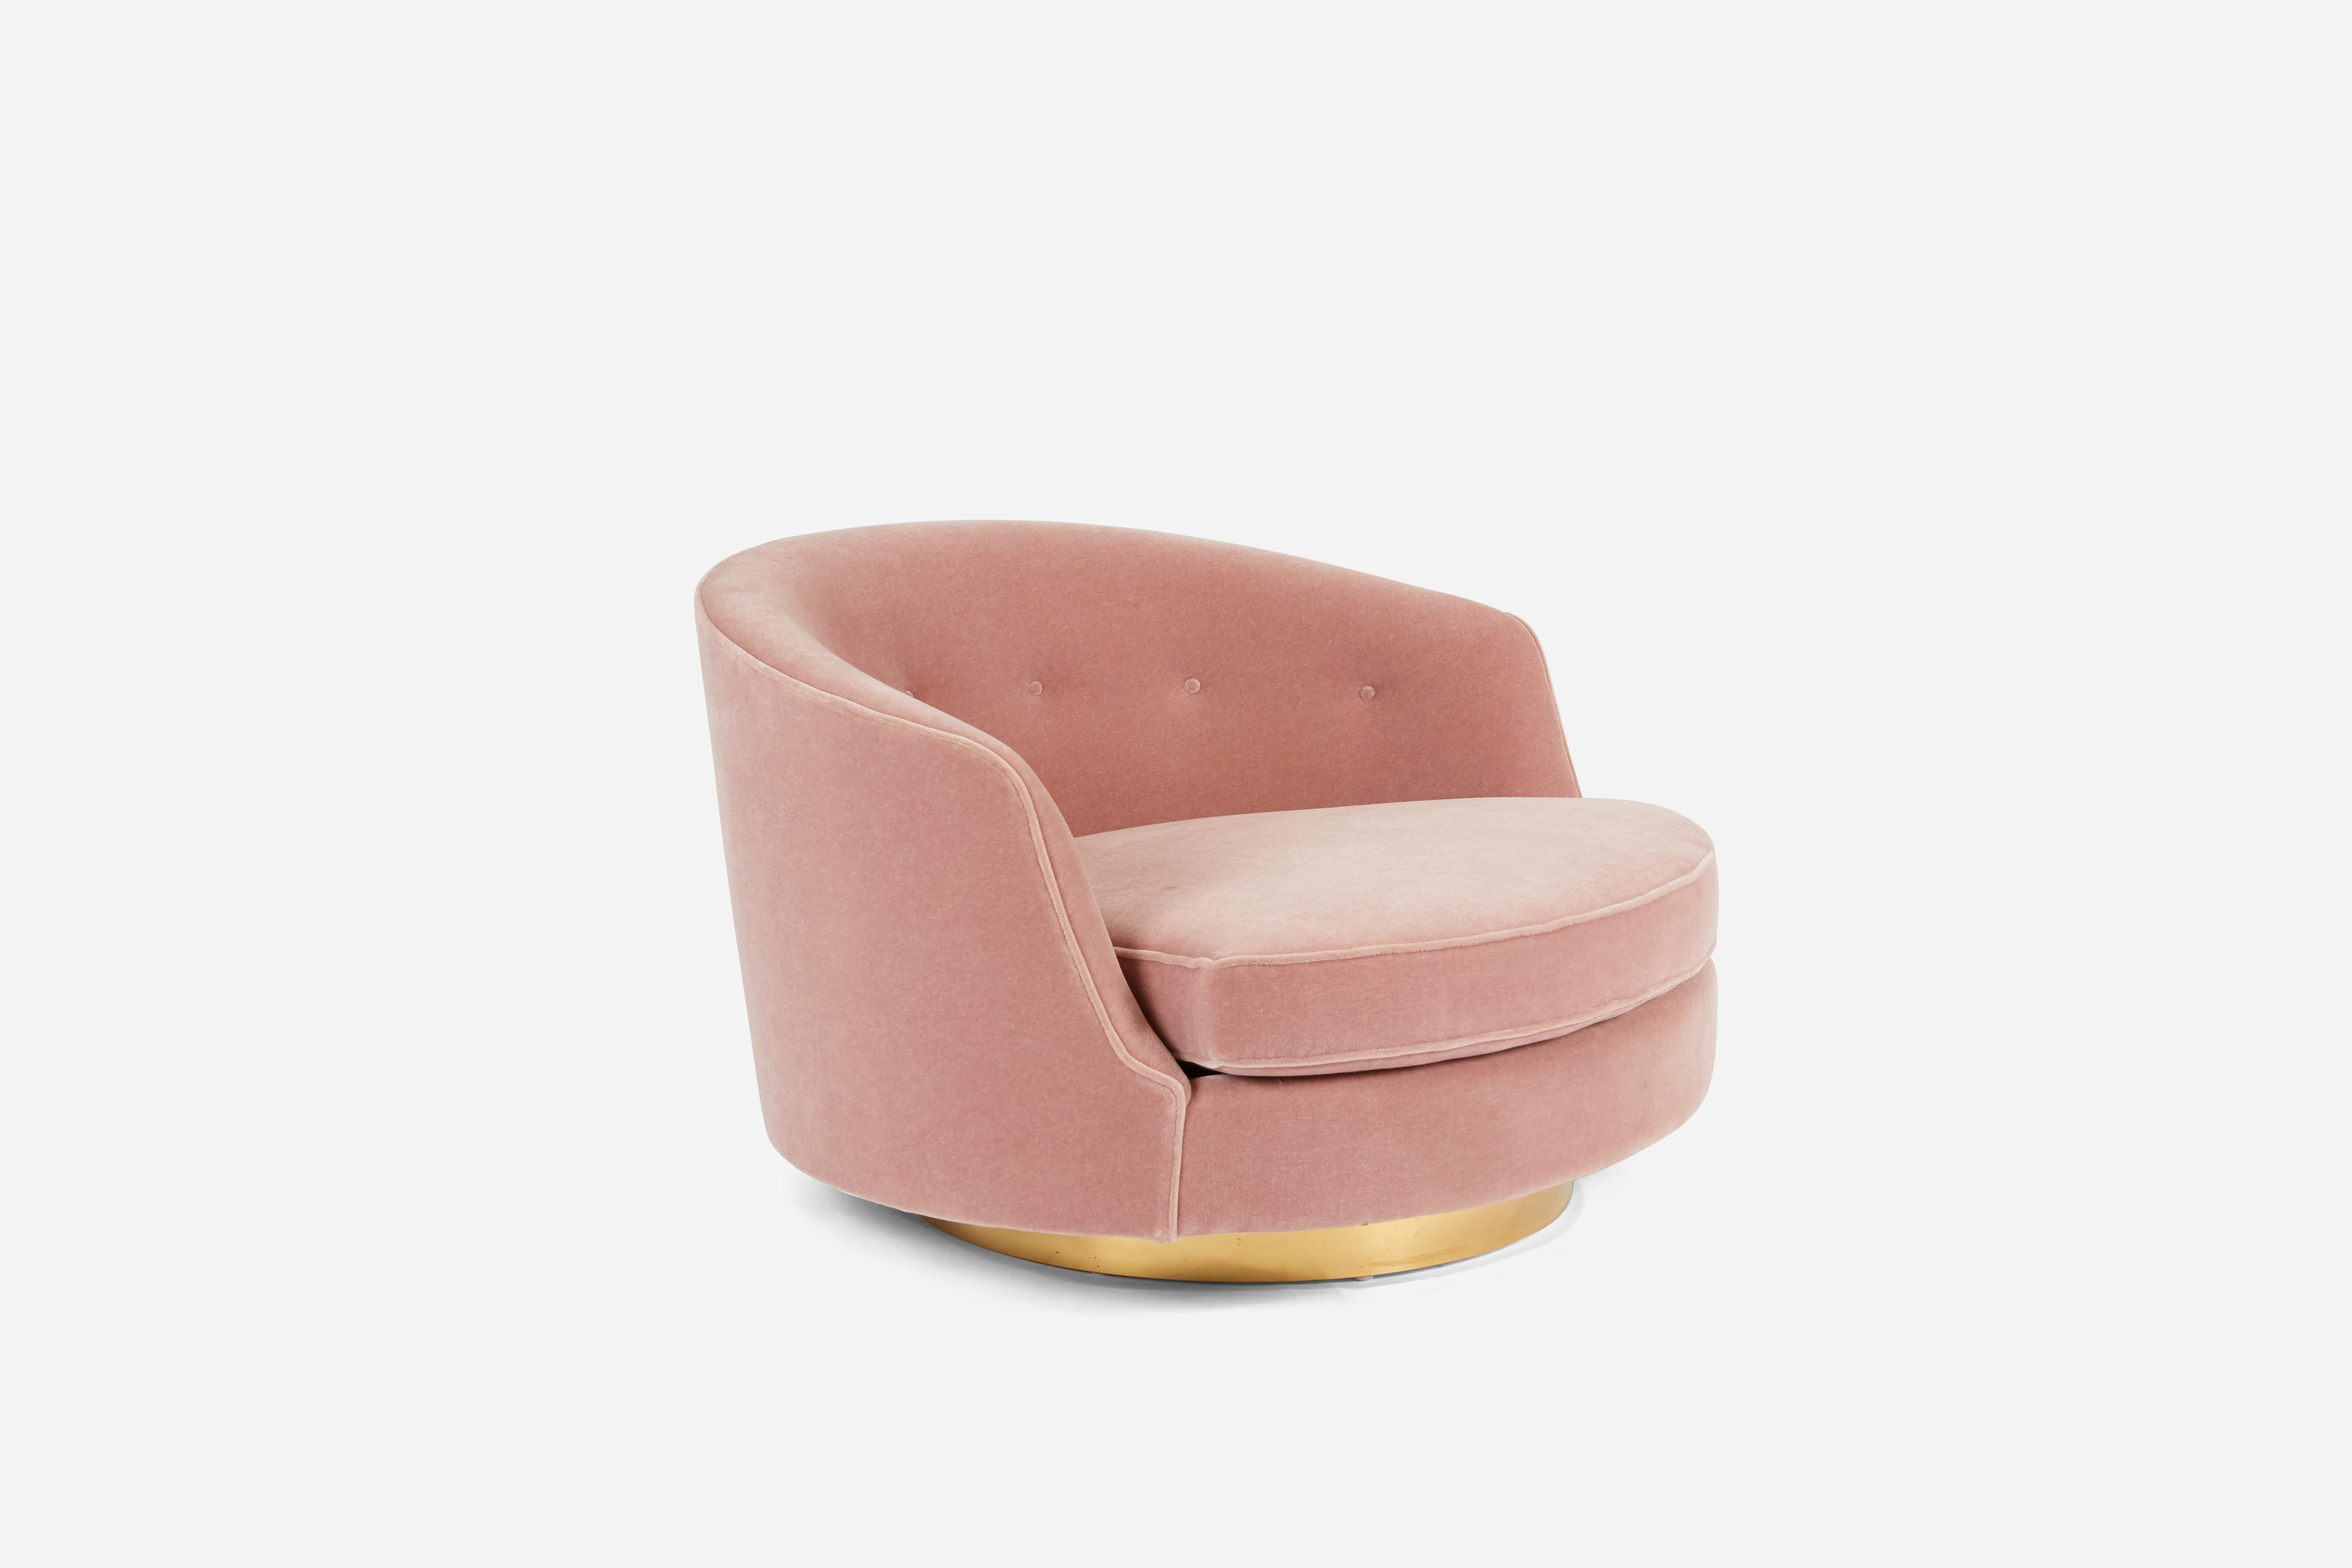 Large-scale swivel chair by Milo Baughman. Fully restored. Reupholstered in dusty pink mohair over swivelling brass base. Base has fresh new raw brass finish, a living finish that will patina with age.